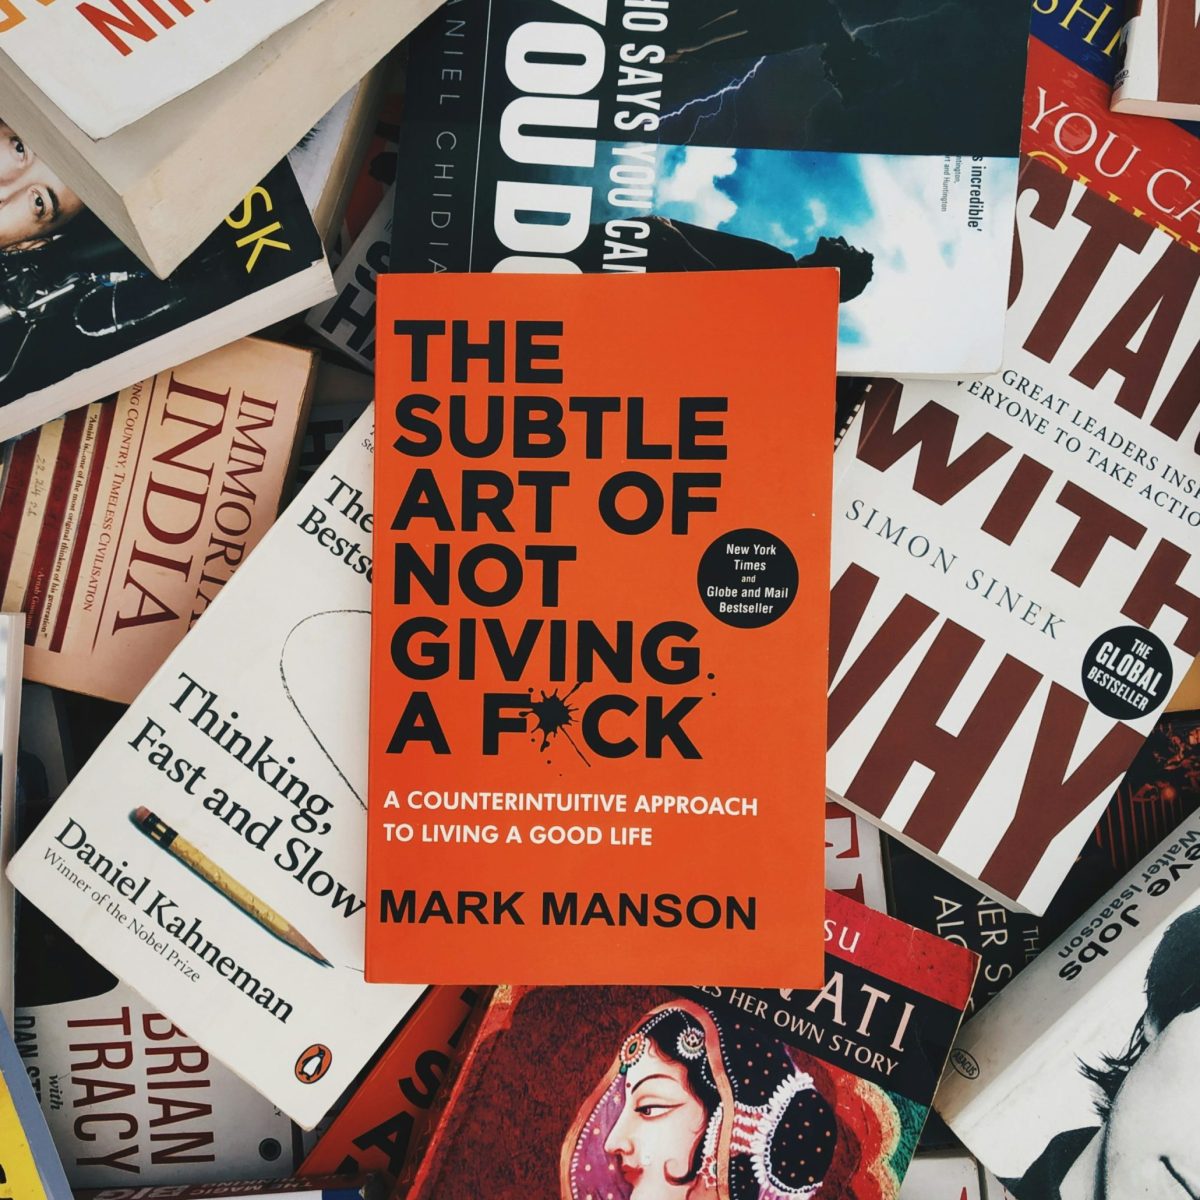 ‘The Subtle Art of Not Giving a F*ck’: a book everyone should read